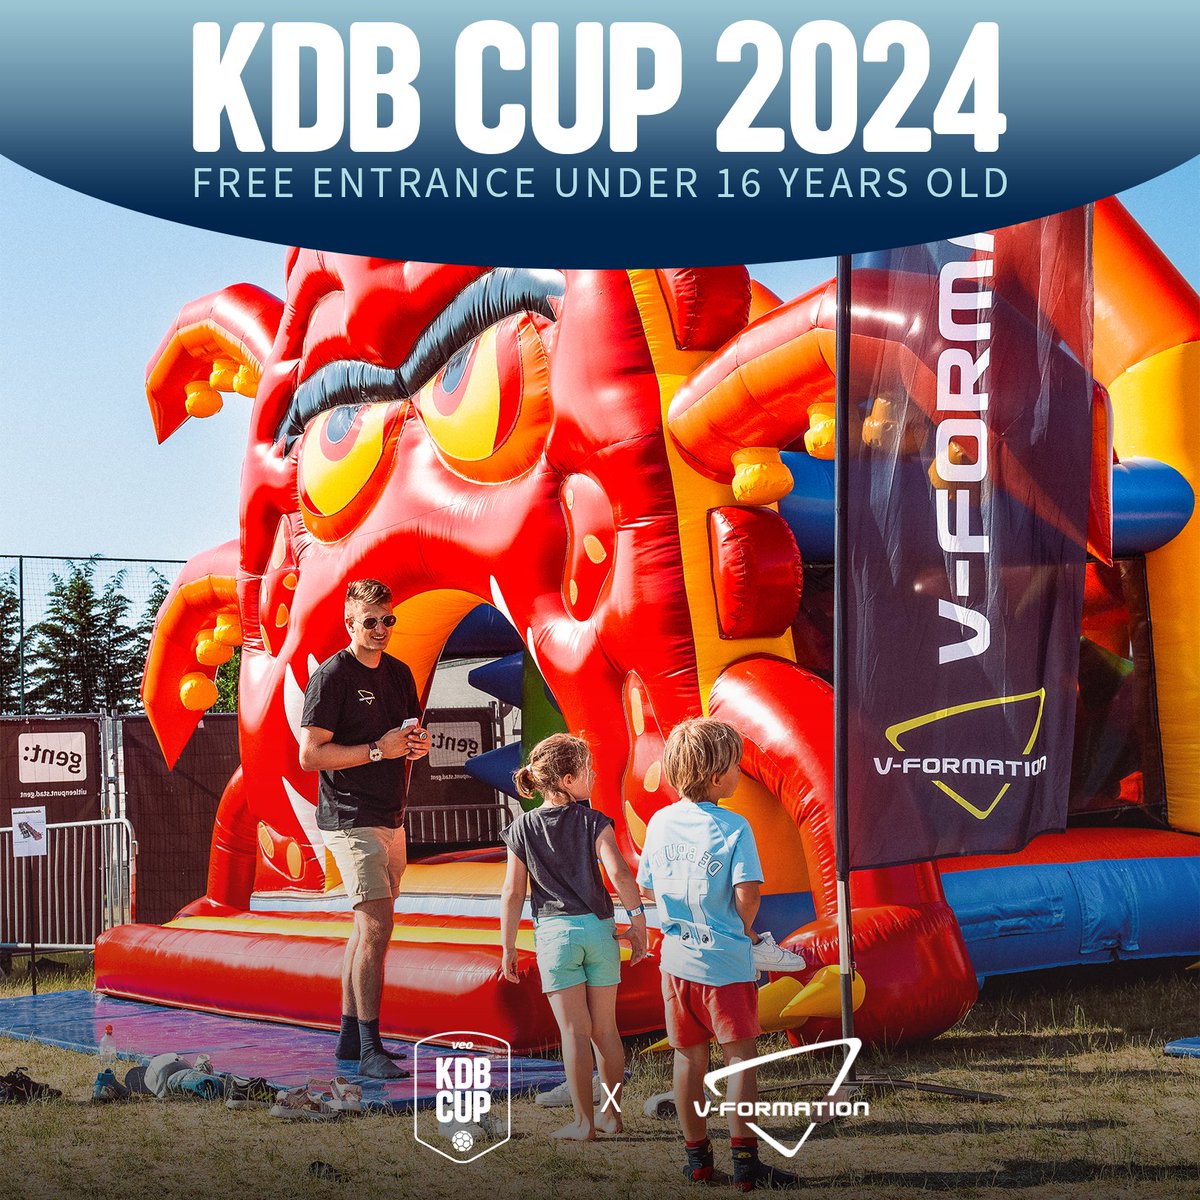 Coming to KDB Cup on June 1 & 2 and under 16 years old? That means you are lucky, times two: 1 - You don’t have to pay an entrance fee! 2 - Together with @VFormationFun we are preparing a giant Fun Area again this year where kids of all ages can have a blast! #veokdbcup2024